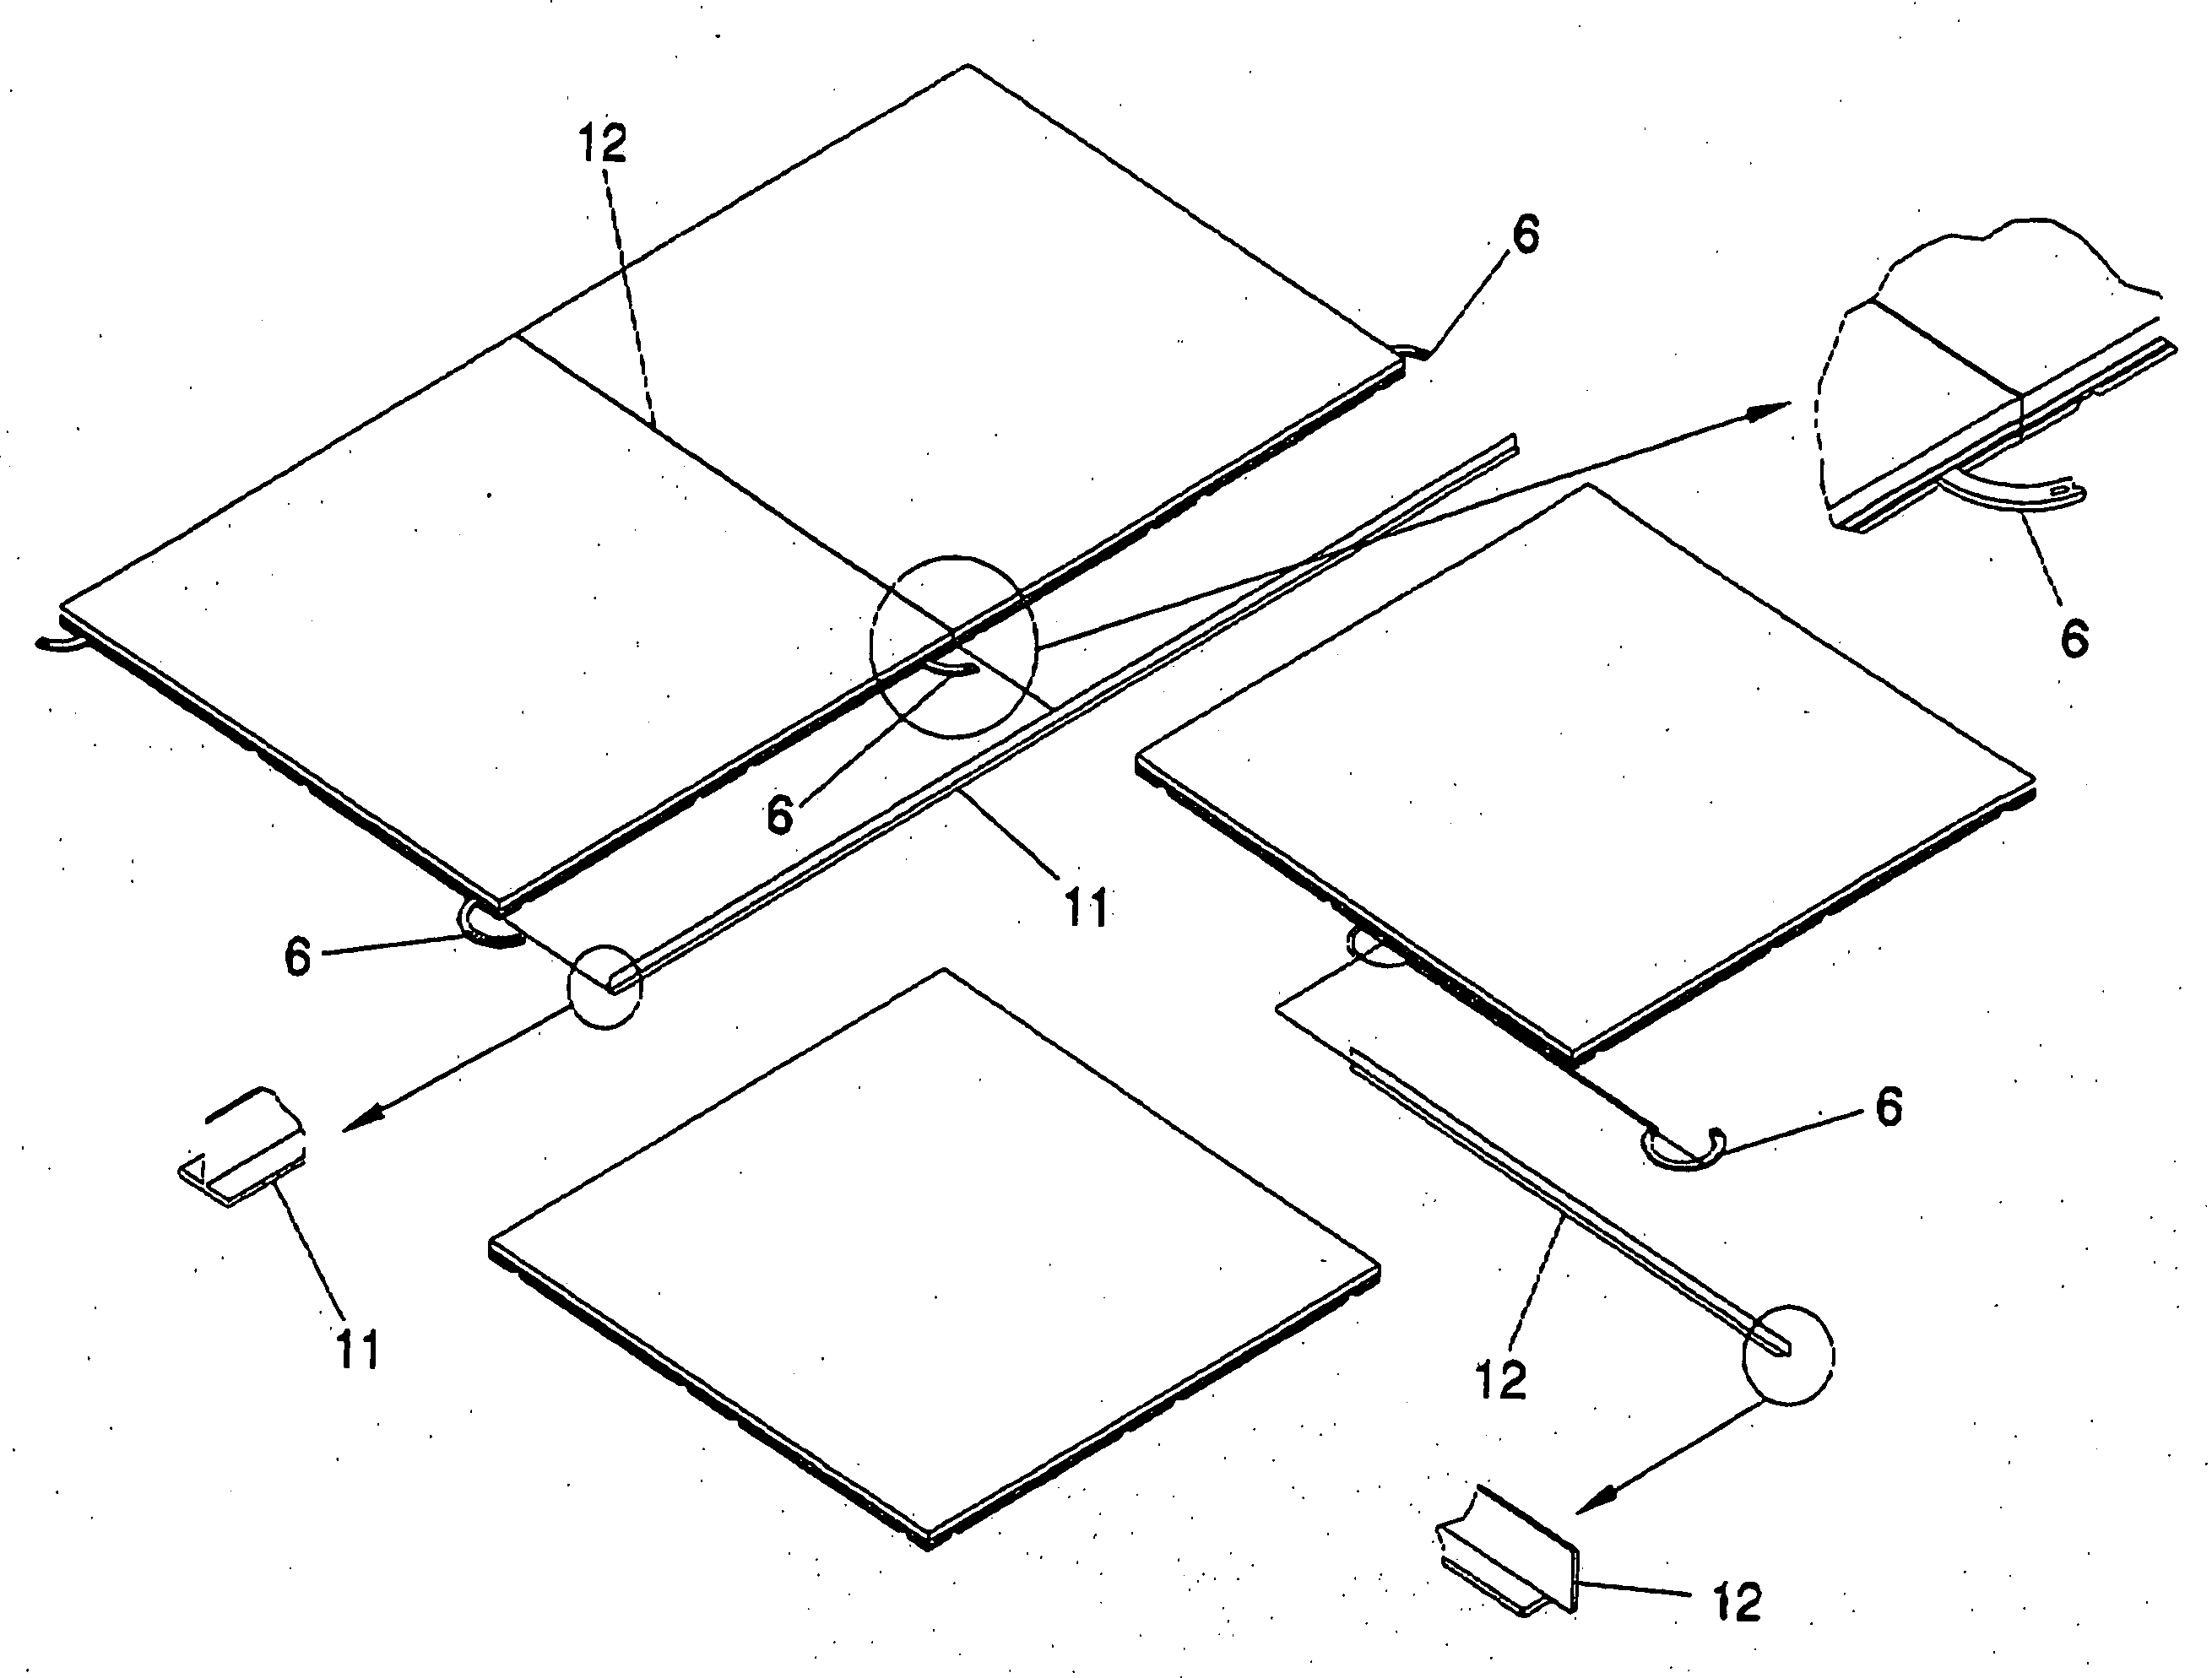 Assembly system for floor and/or wall tiles